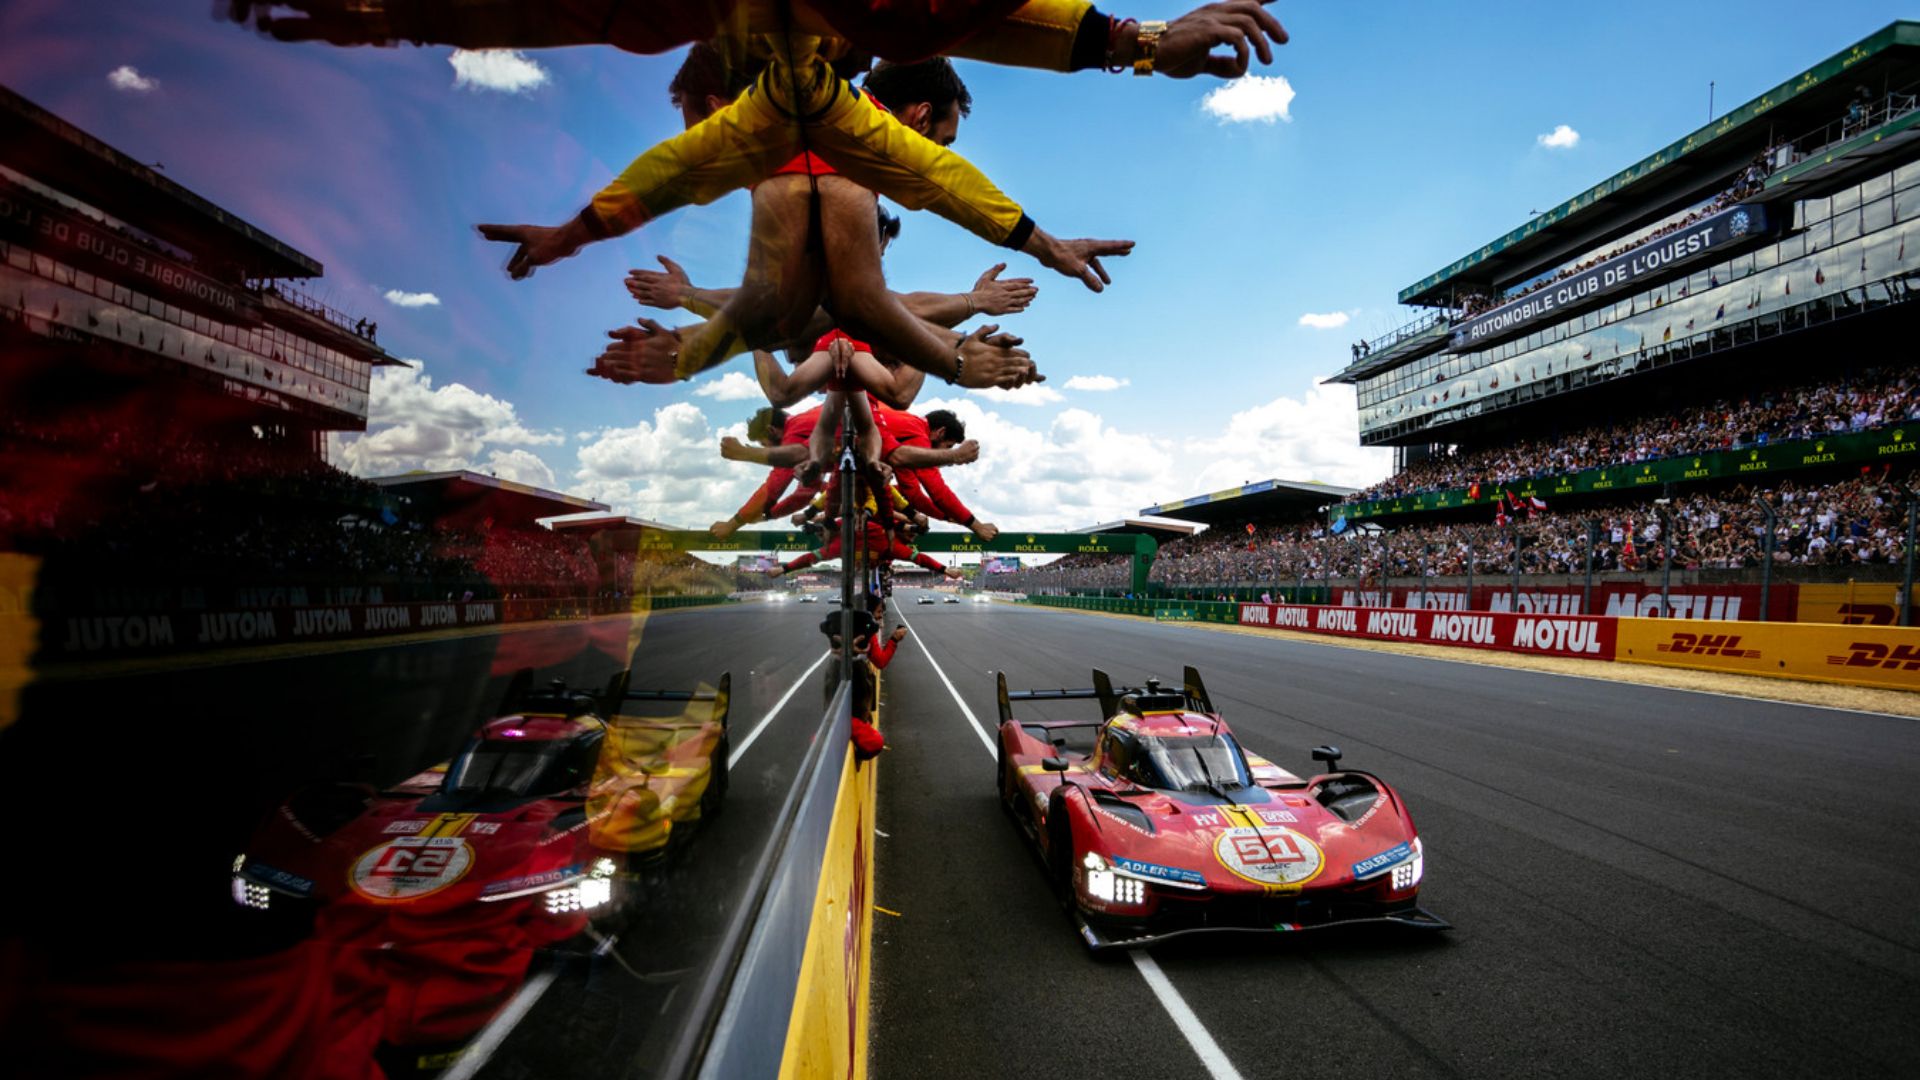 Ferrari 499P wins on debut at 24 Hours of Le Mans